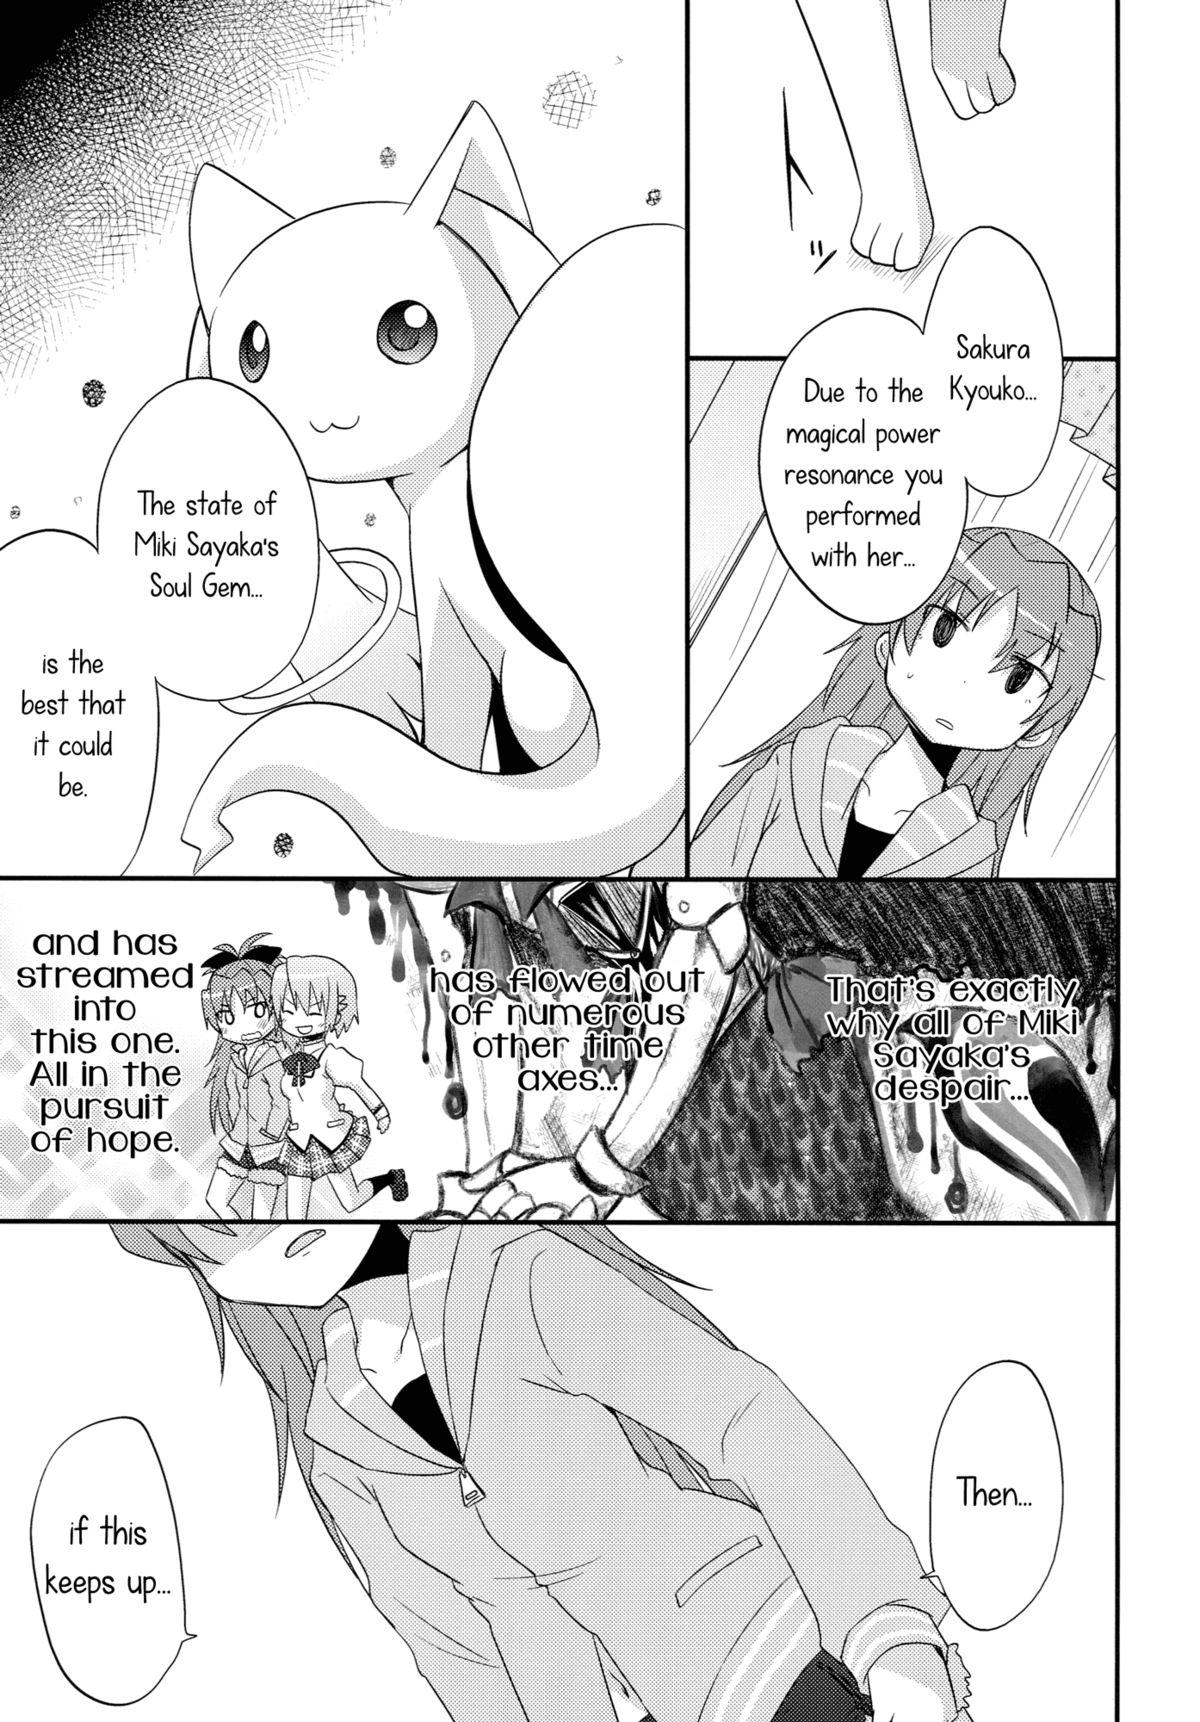 Tiny Our Courting War Front - Puella magi madoka magica Shaved Pussy - Page 10